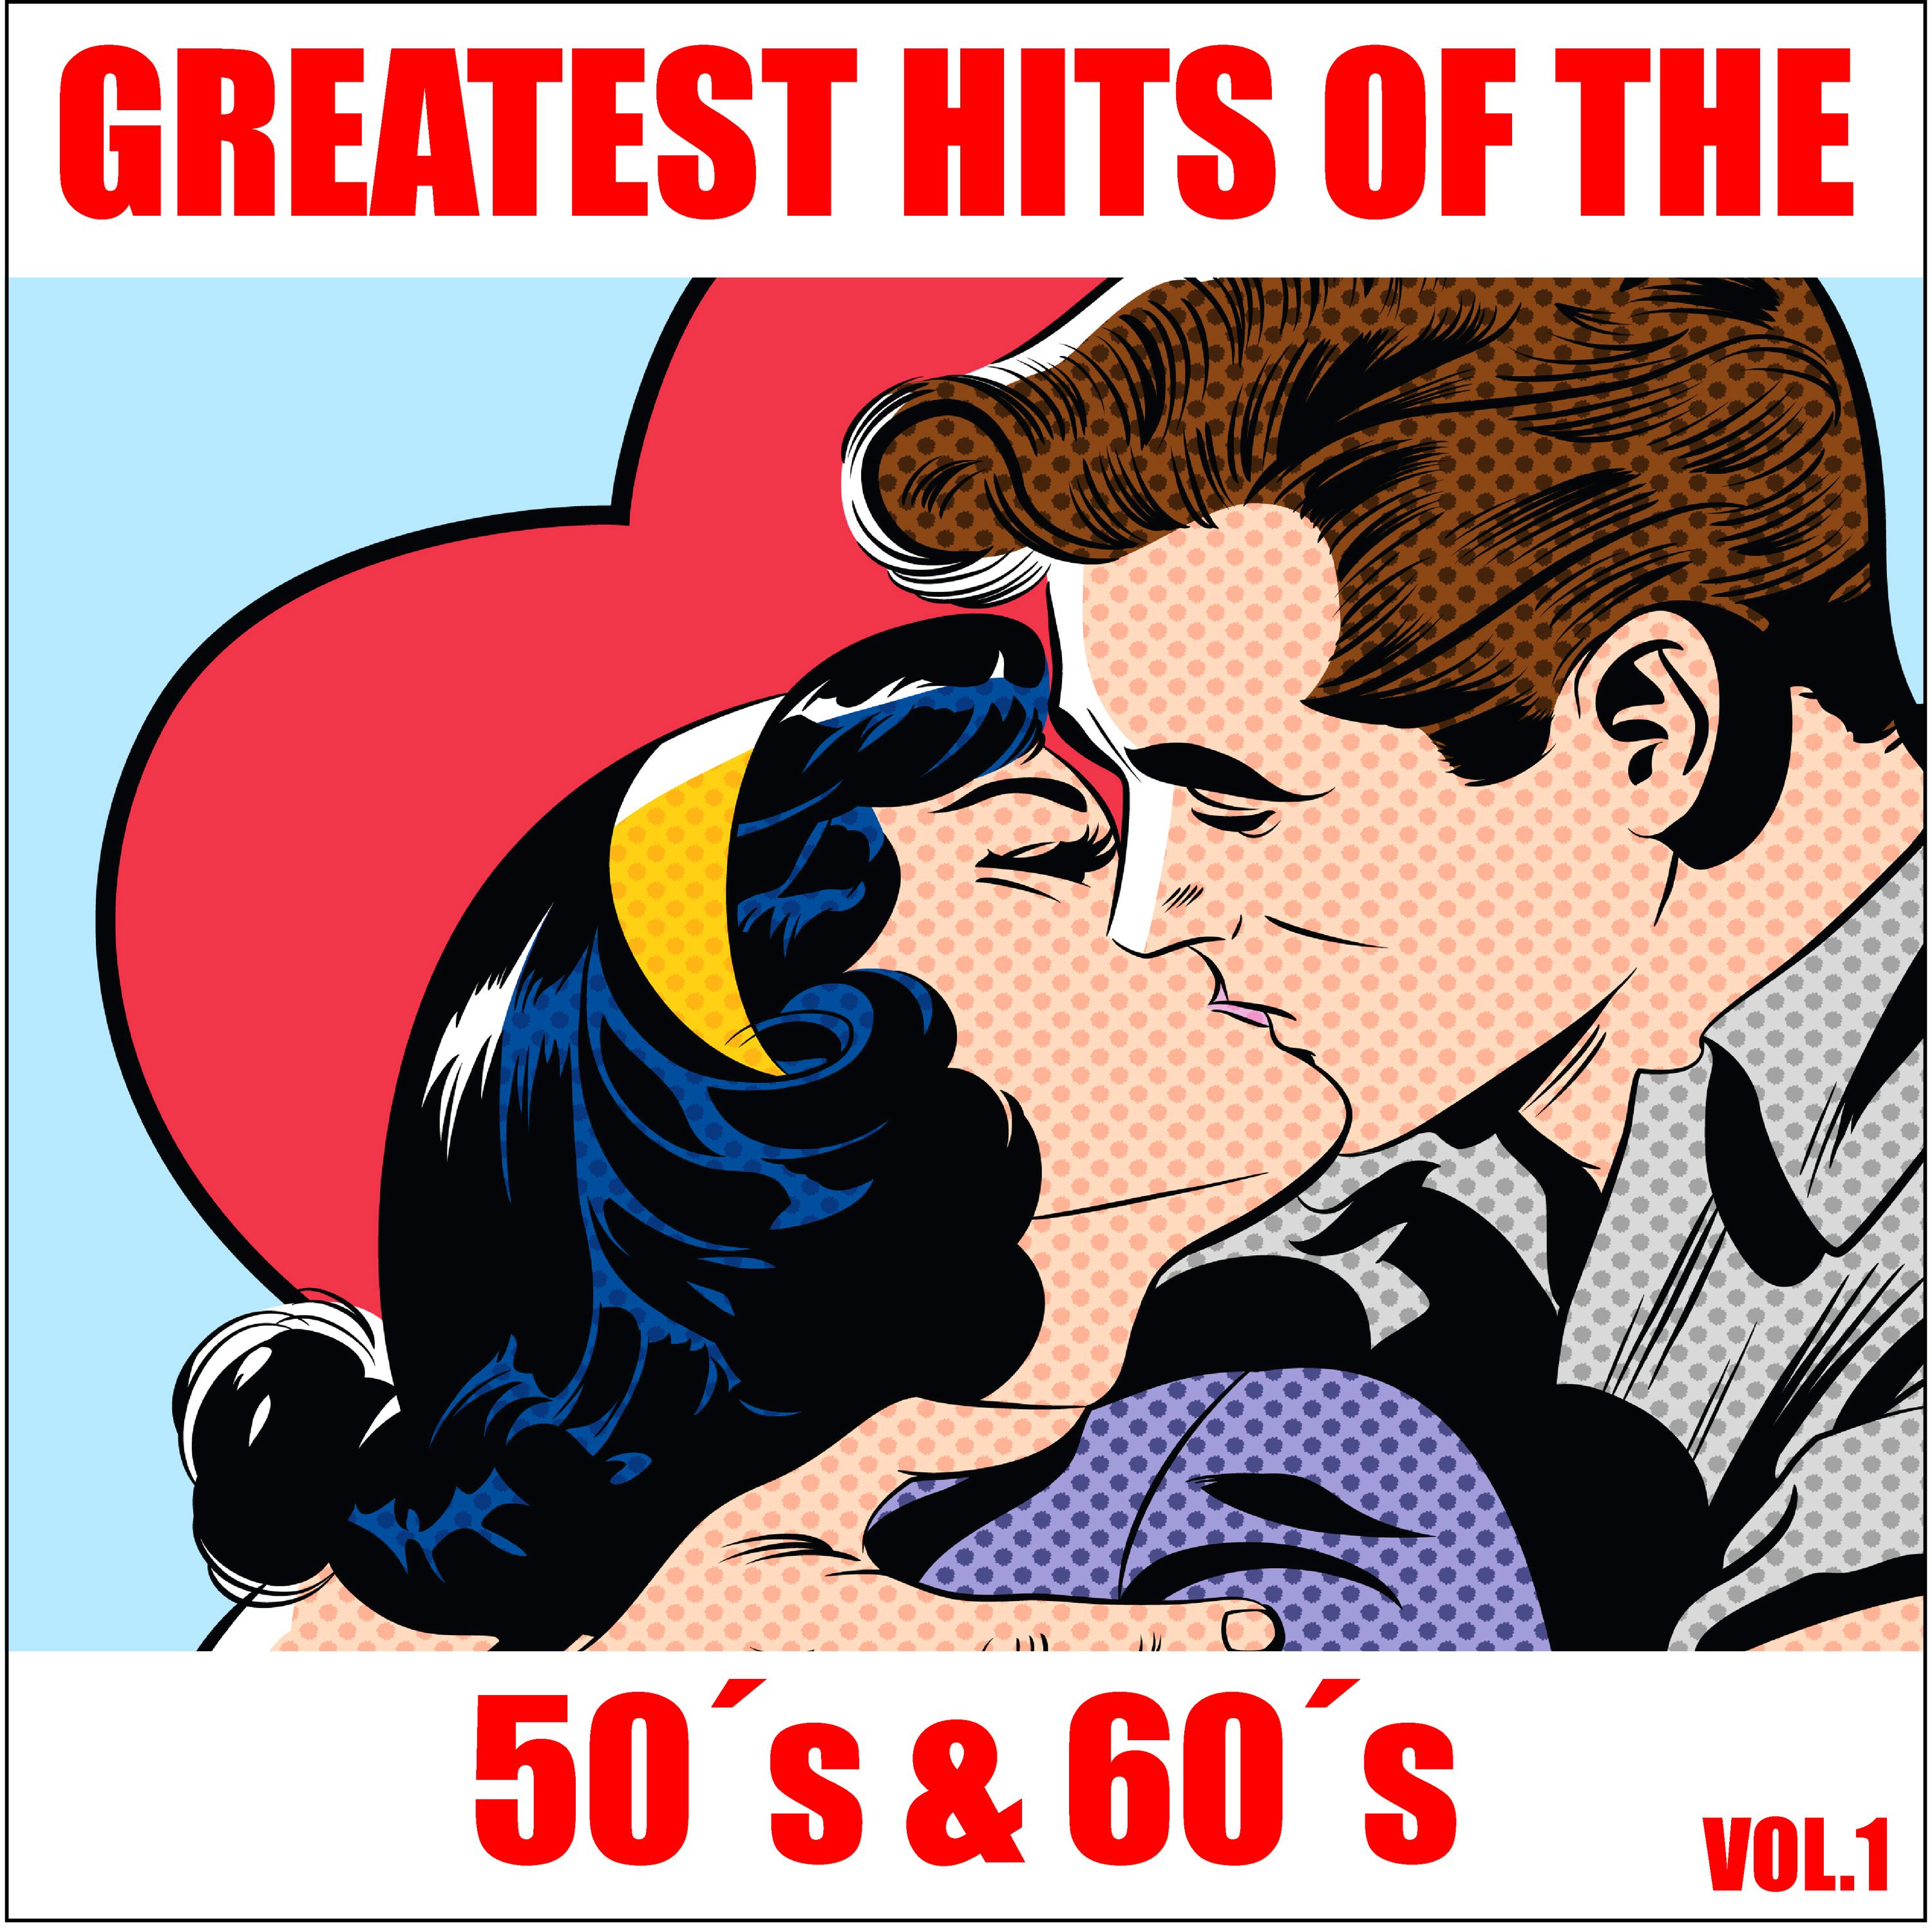 Greatest Hits of the 50's & 60's, Vol. 1